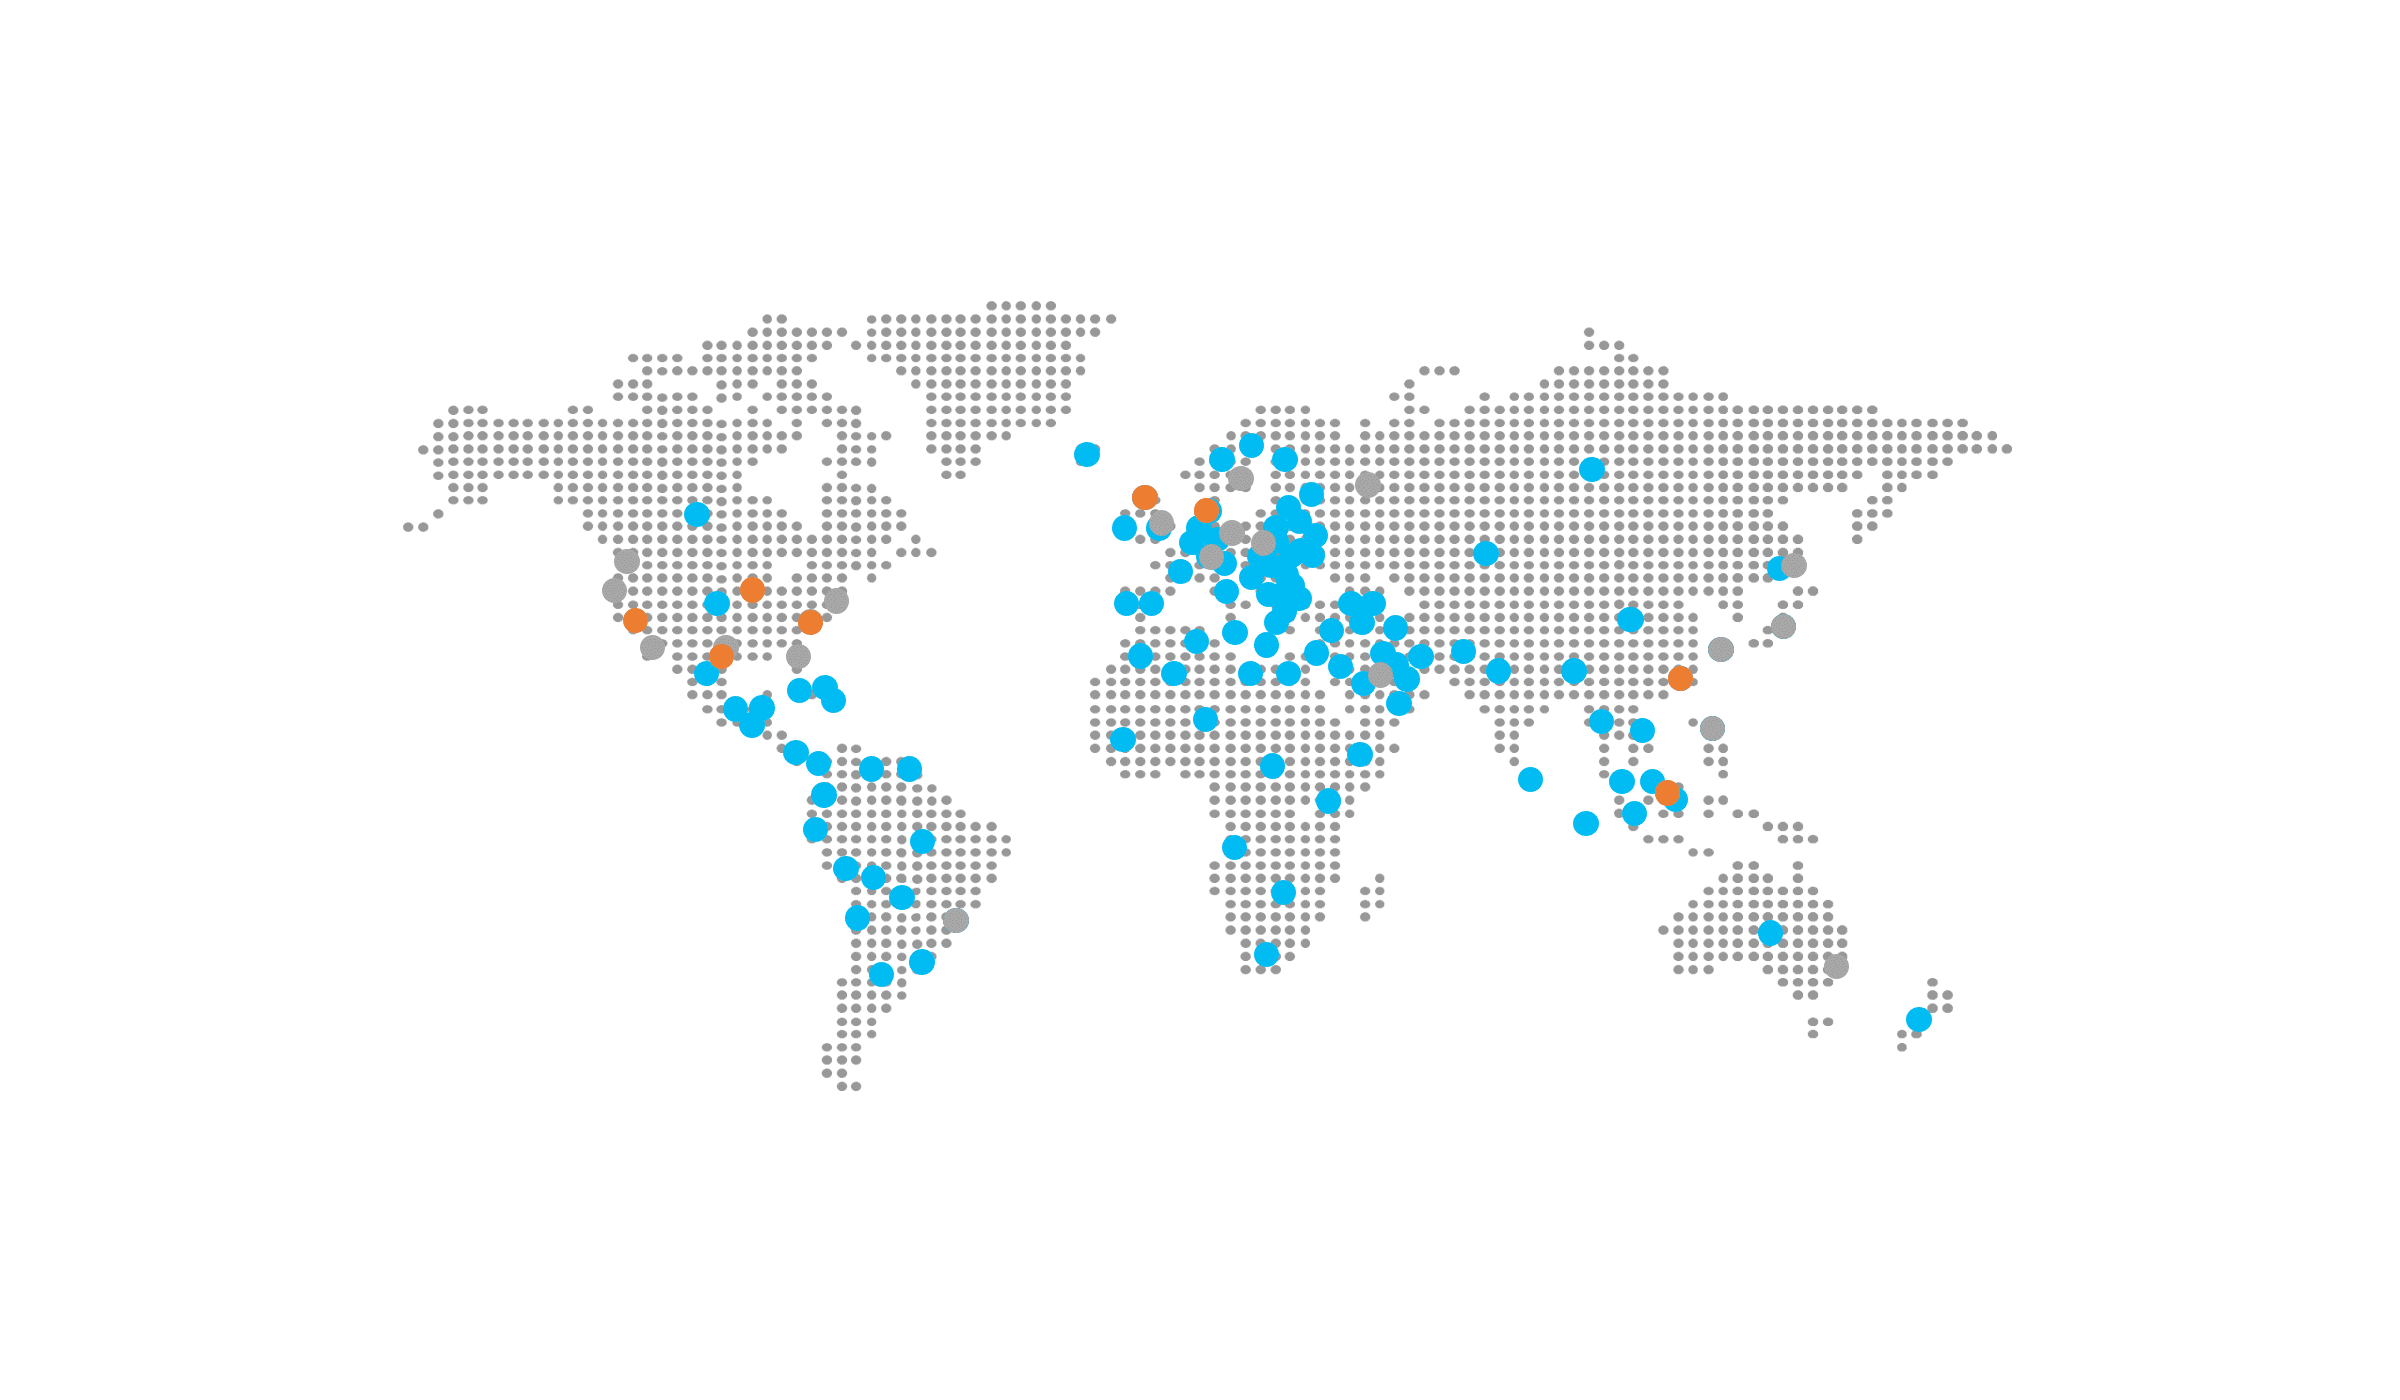 Global Azure Bootcamp locations